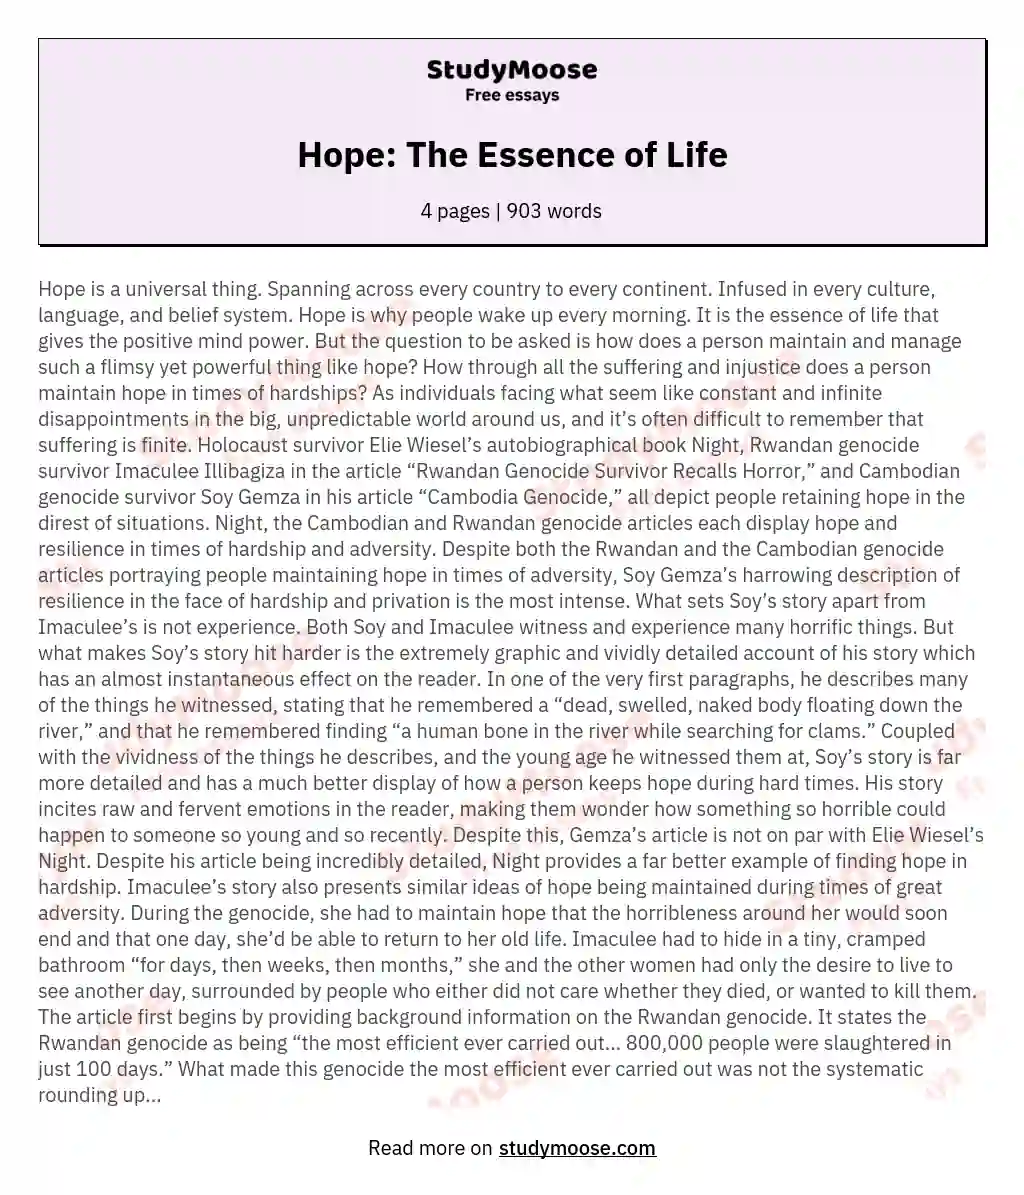 Hope: The Essence of Life